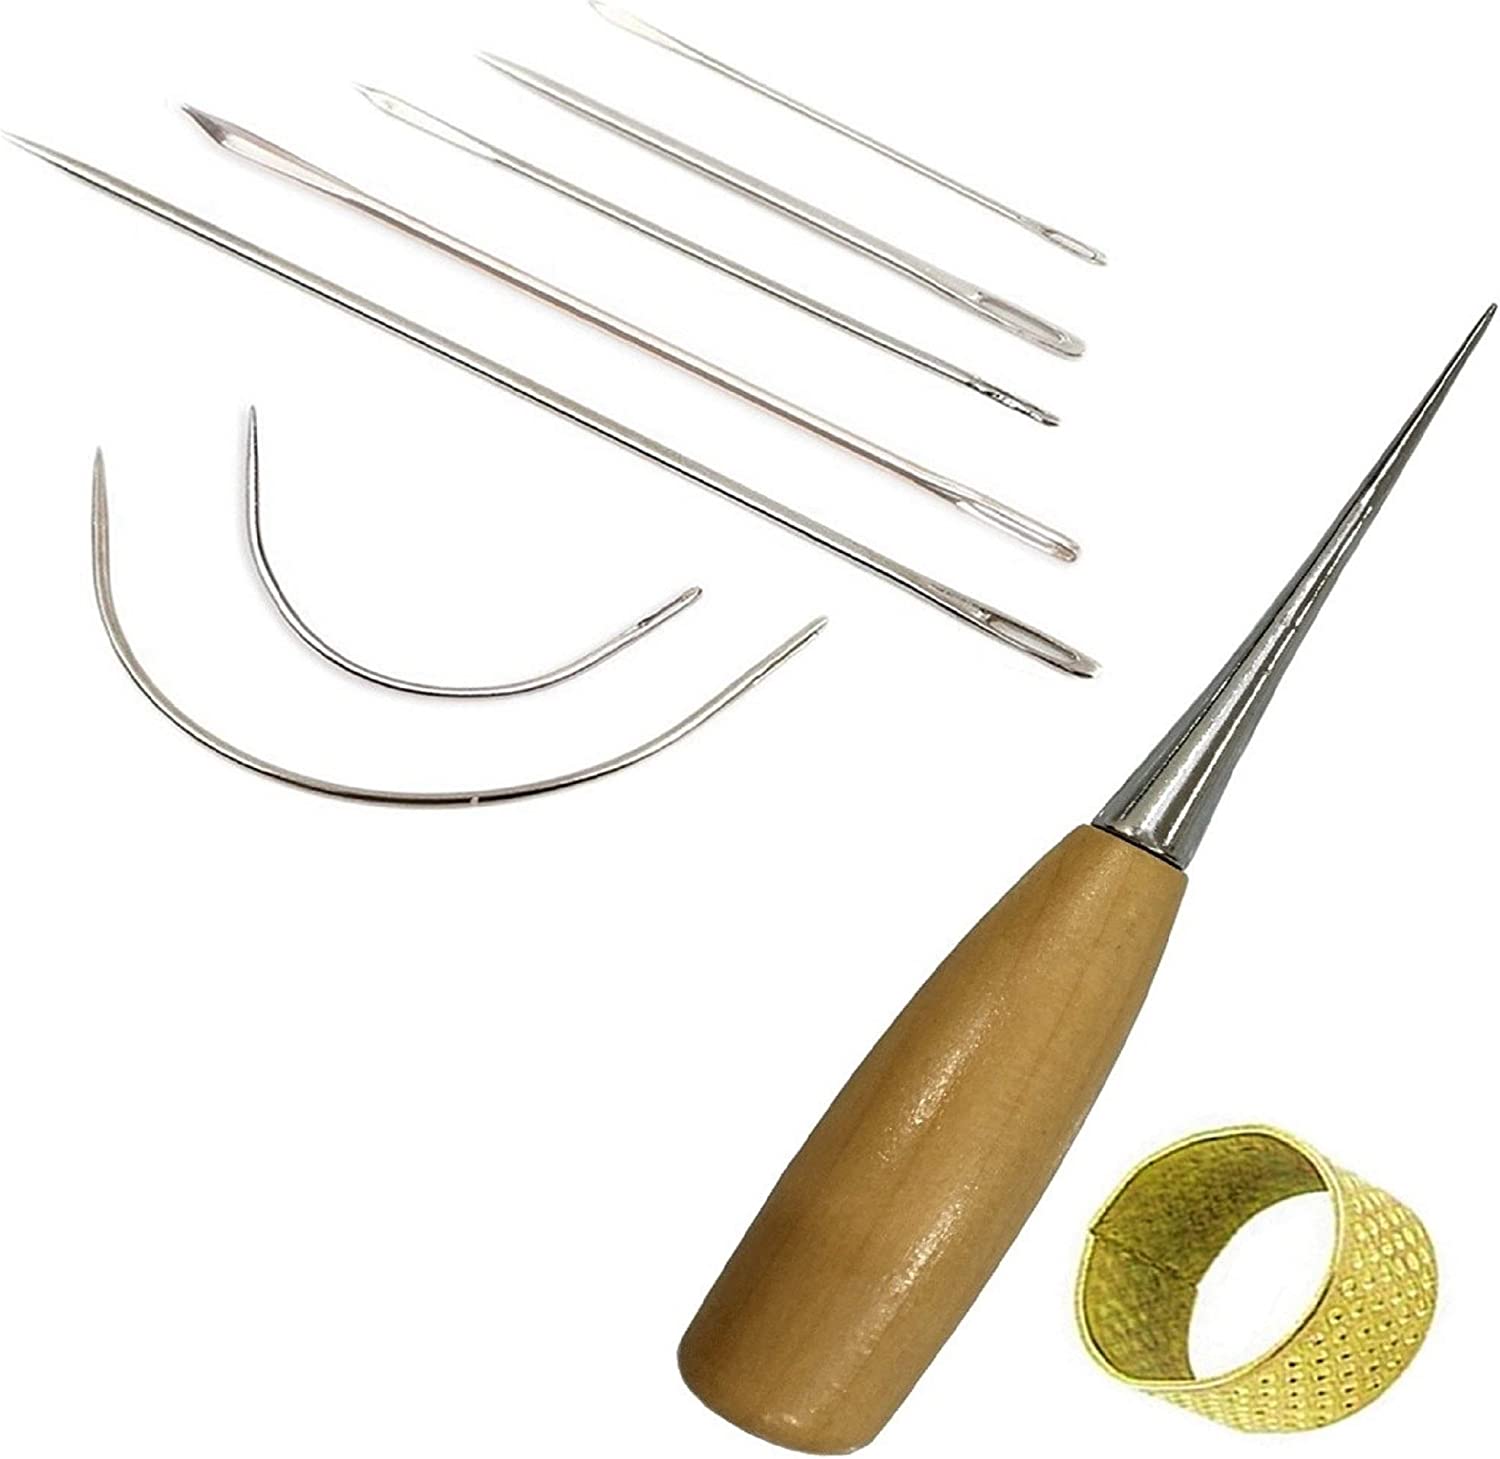 Leather Embroidery Needles with Needle Case, Including Curved Needles,  Triangle Needles, Straight Needles, Thimble, Scissors, Finger Cot for  Upholstery Carpet Leather Canvas Repair and Bookbinding